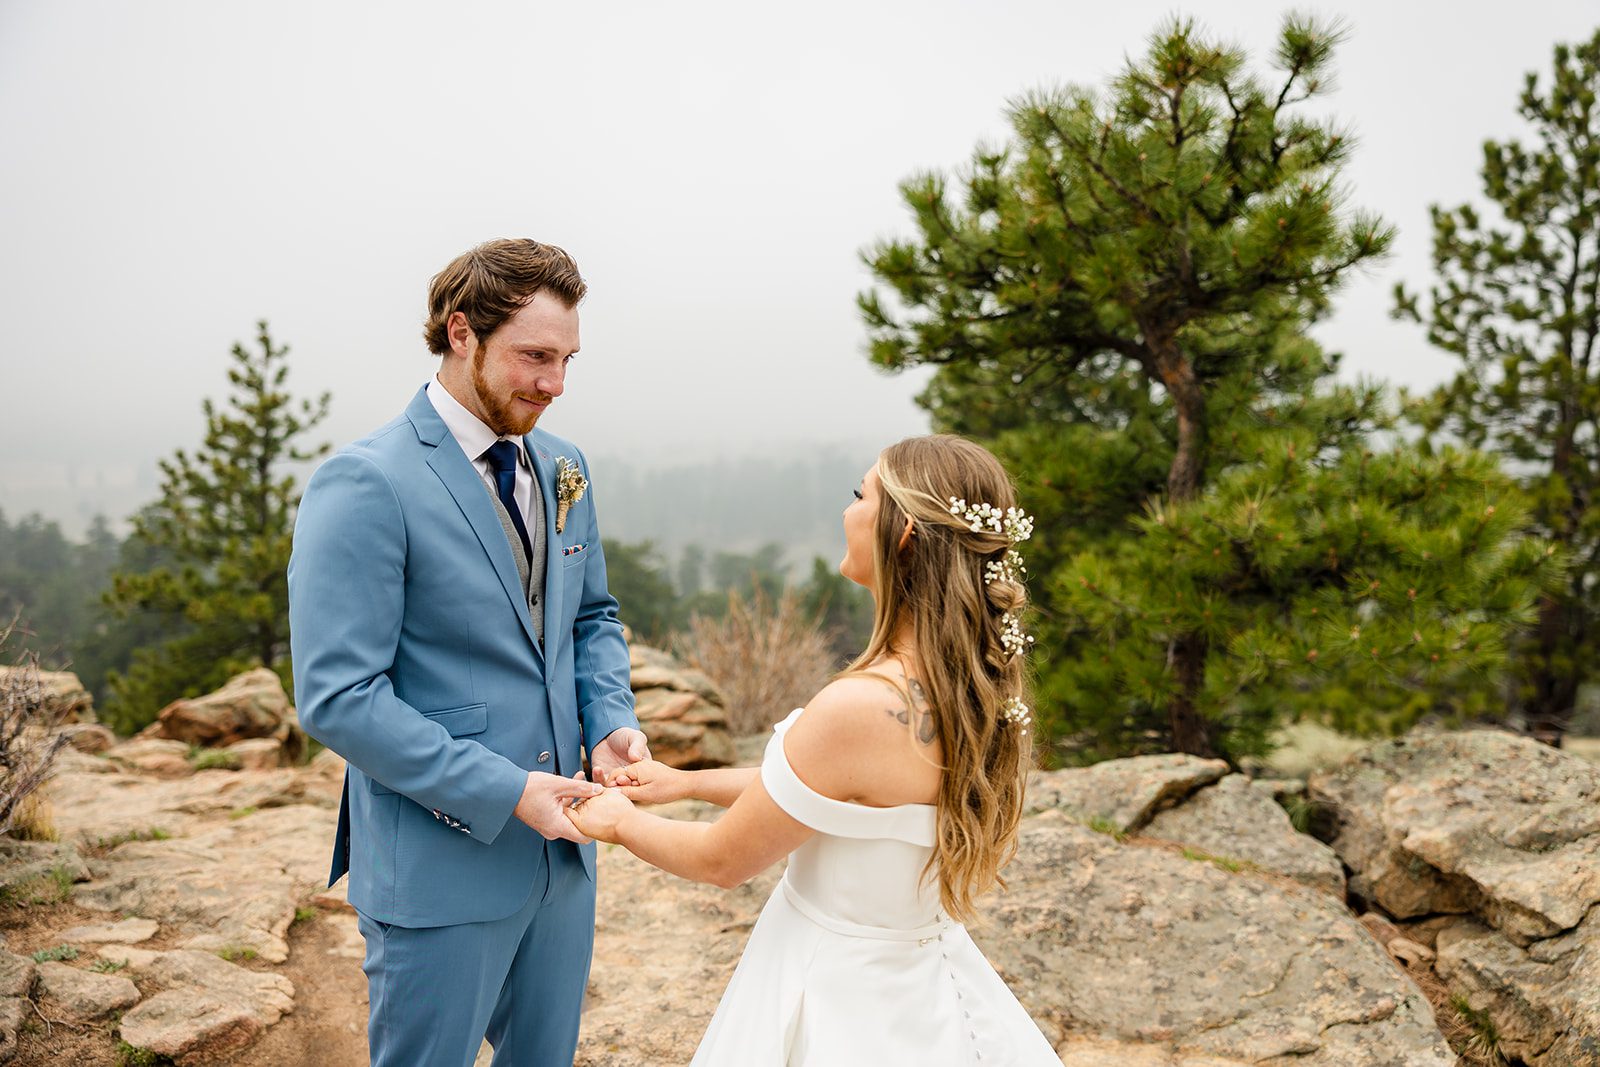 Wedding first look at 3M Curve in Rocky Mountain National Park Estes Park Colorado Elopement